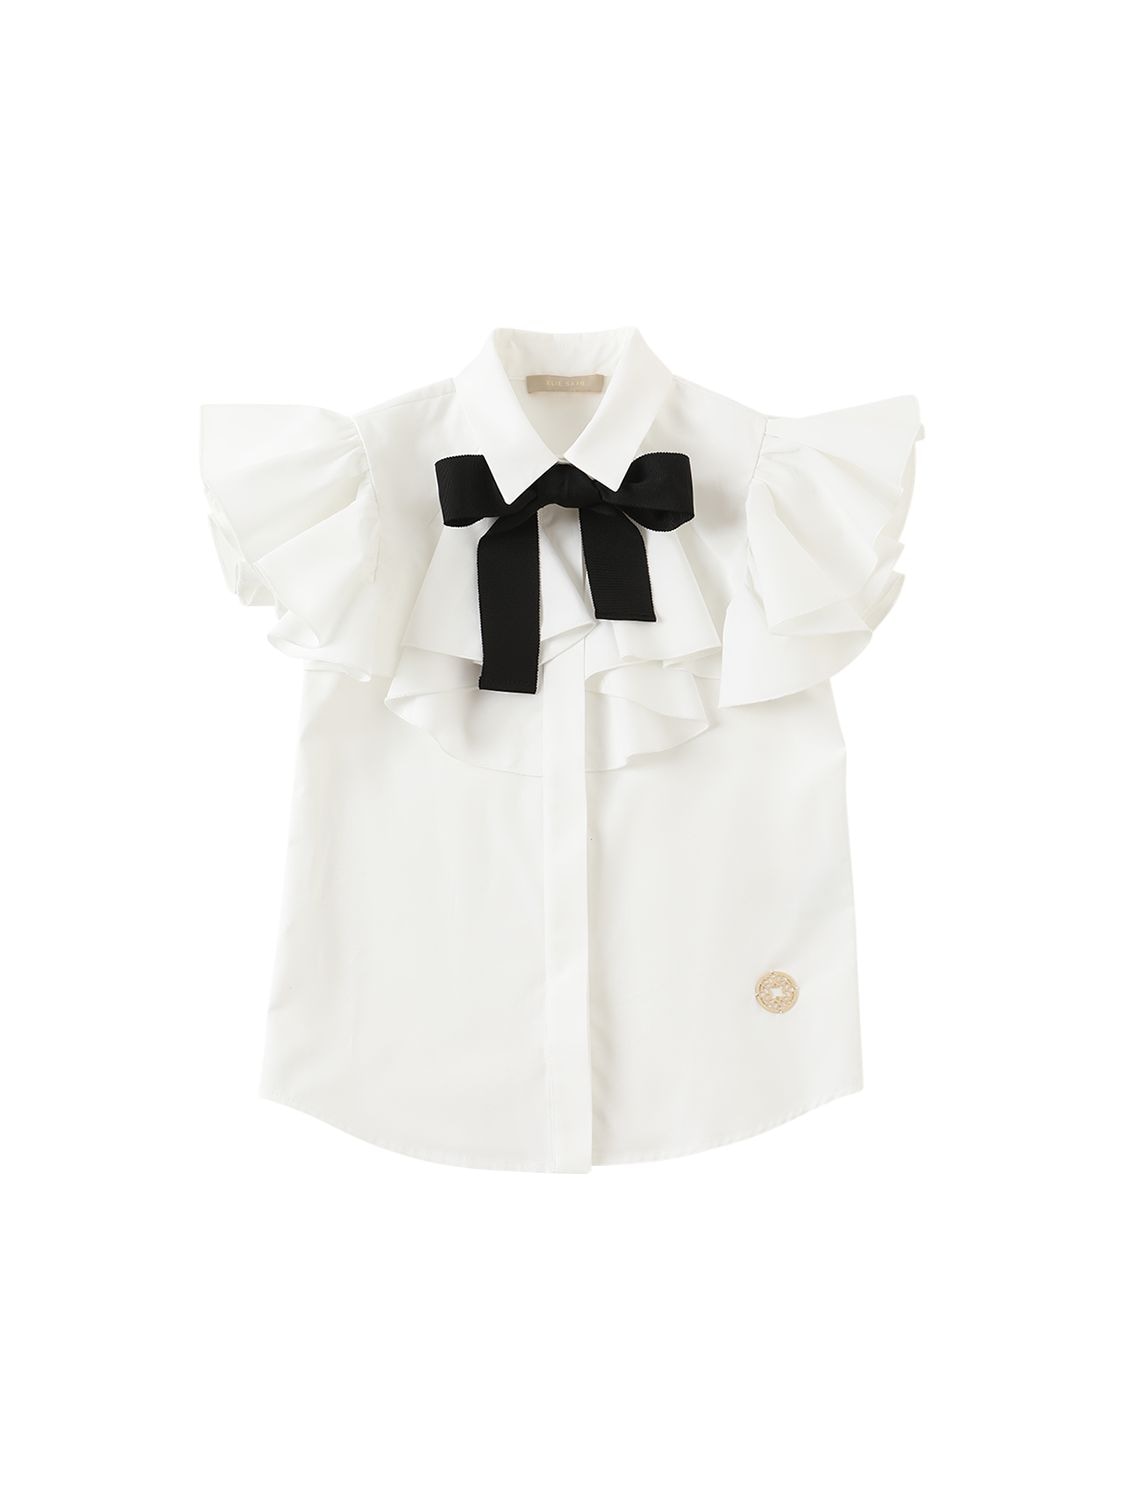 Elie Saab Kids' Cotton Eyelet Lace Shirt W/ Bow In White